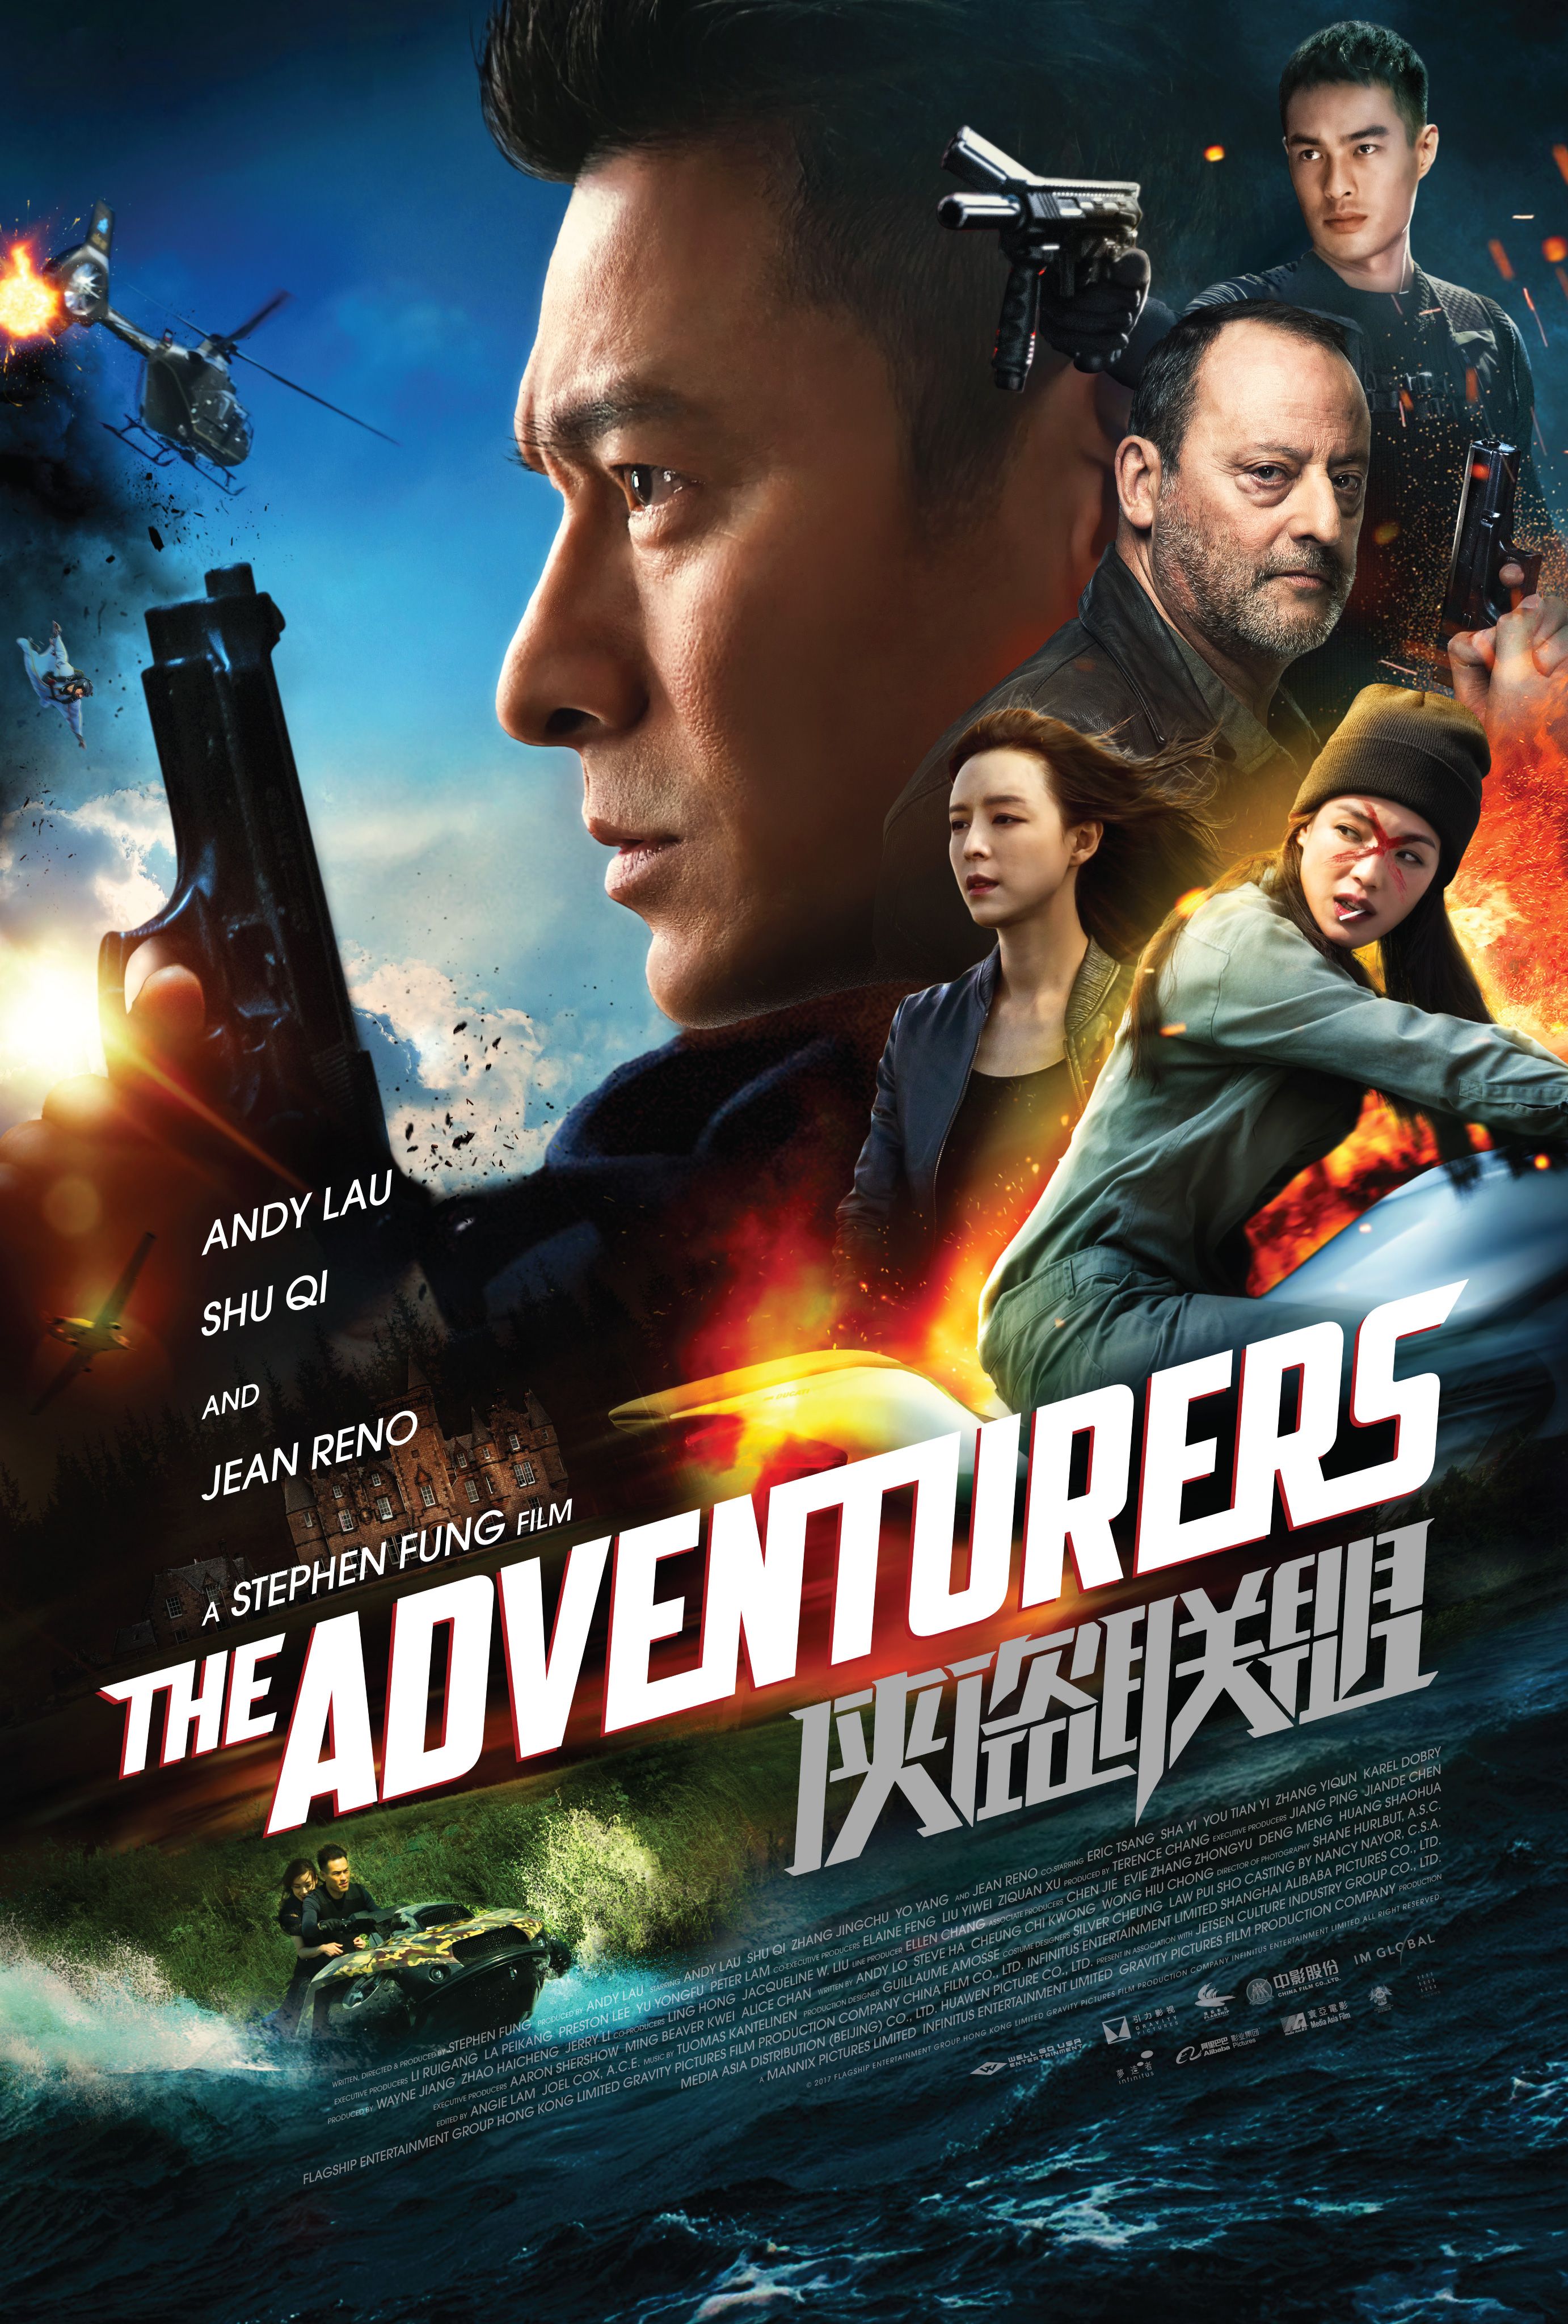 The Adventurers (2017) Hindi Dubbed BluRay download full movie